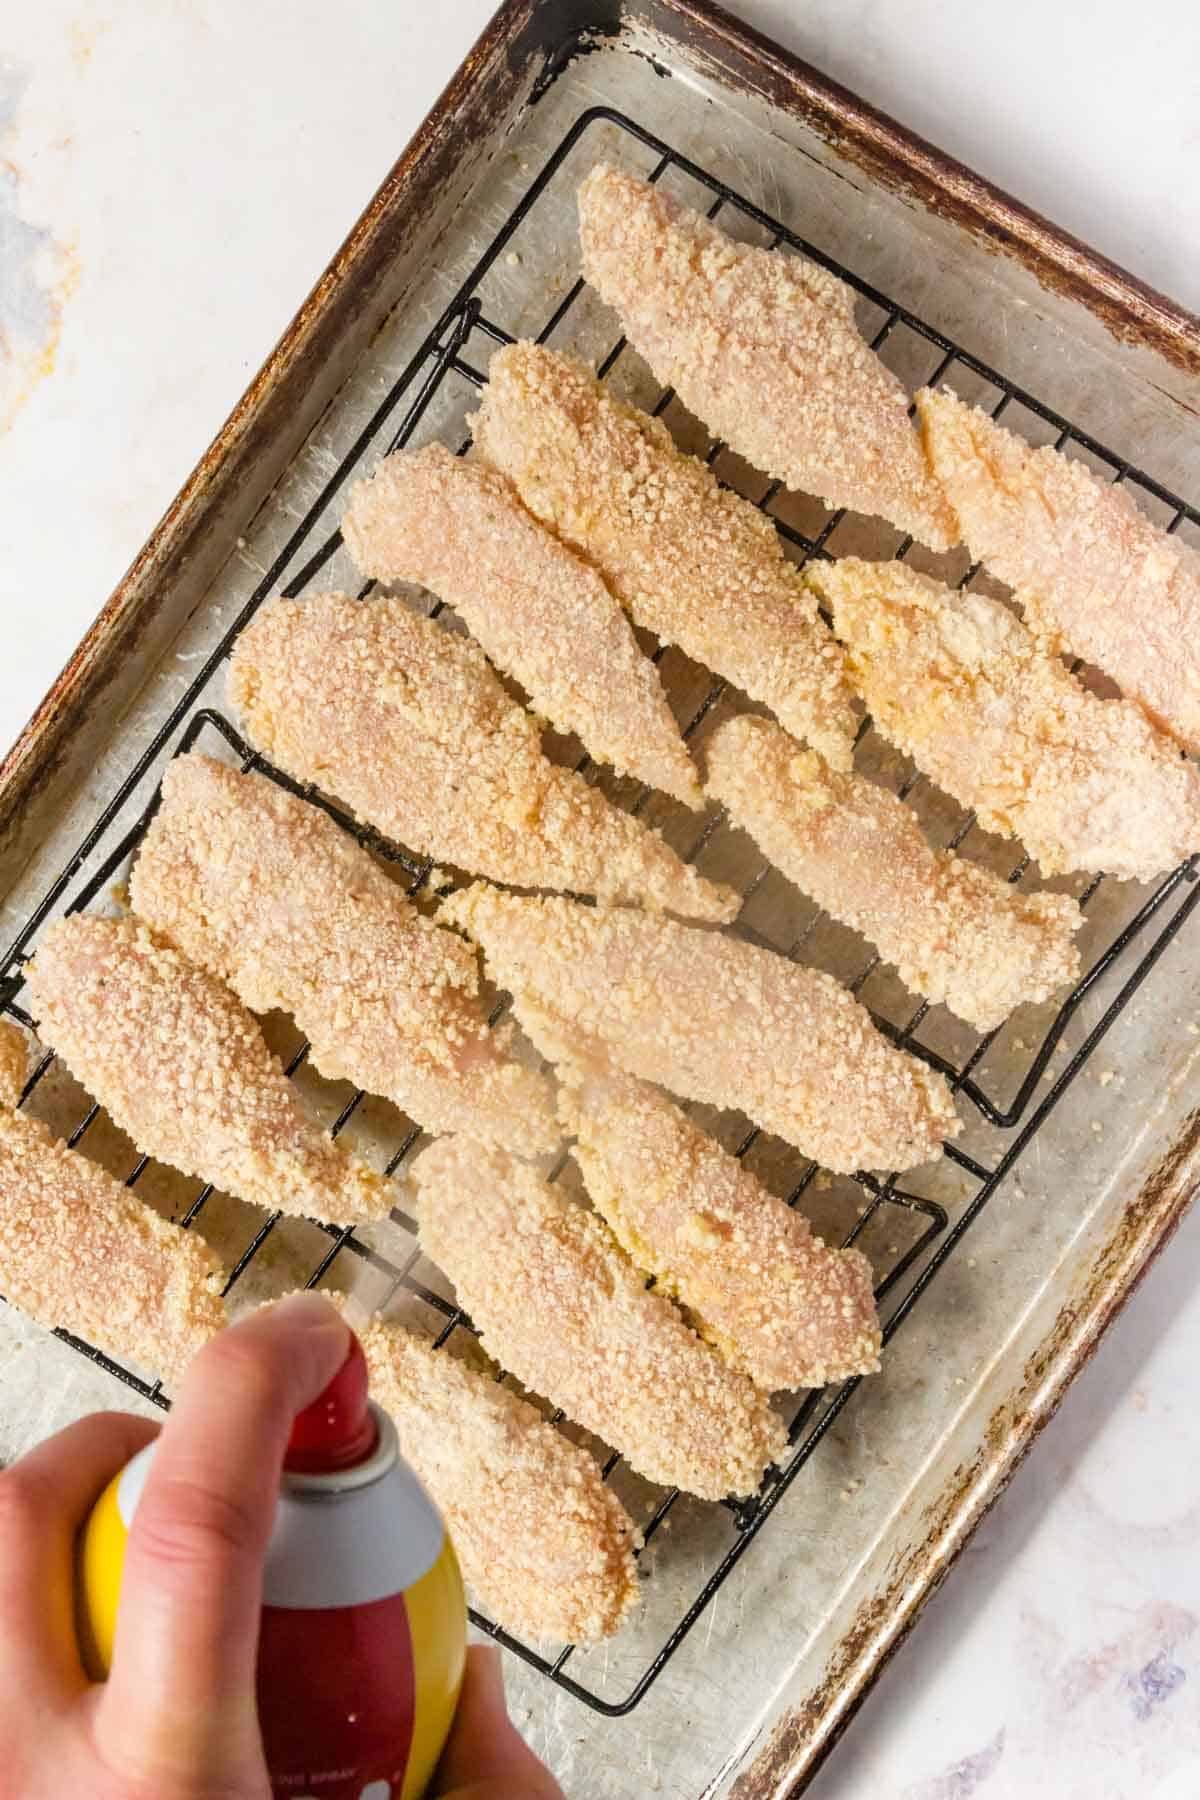 A hand sprays cooking oil over unbaked chicken tenders coated in breading, lined up on a wire rack on top of a baking sheet.